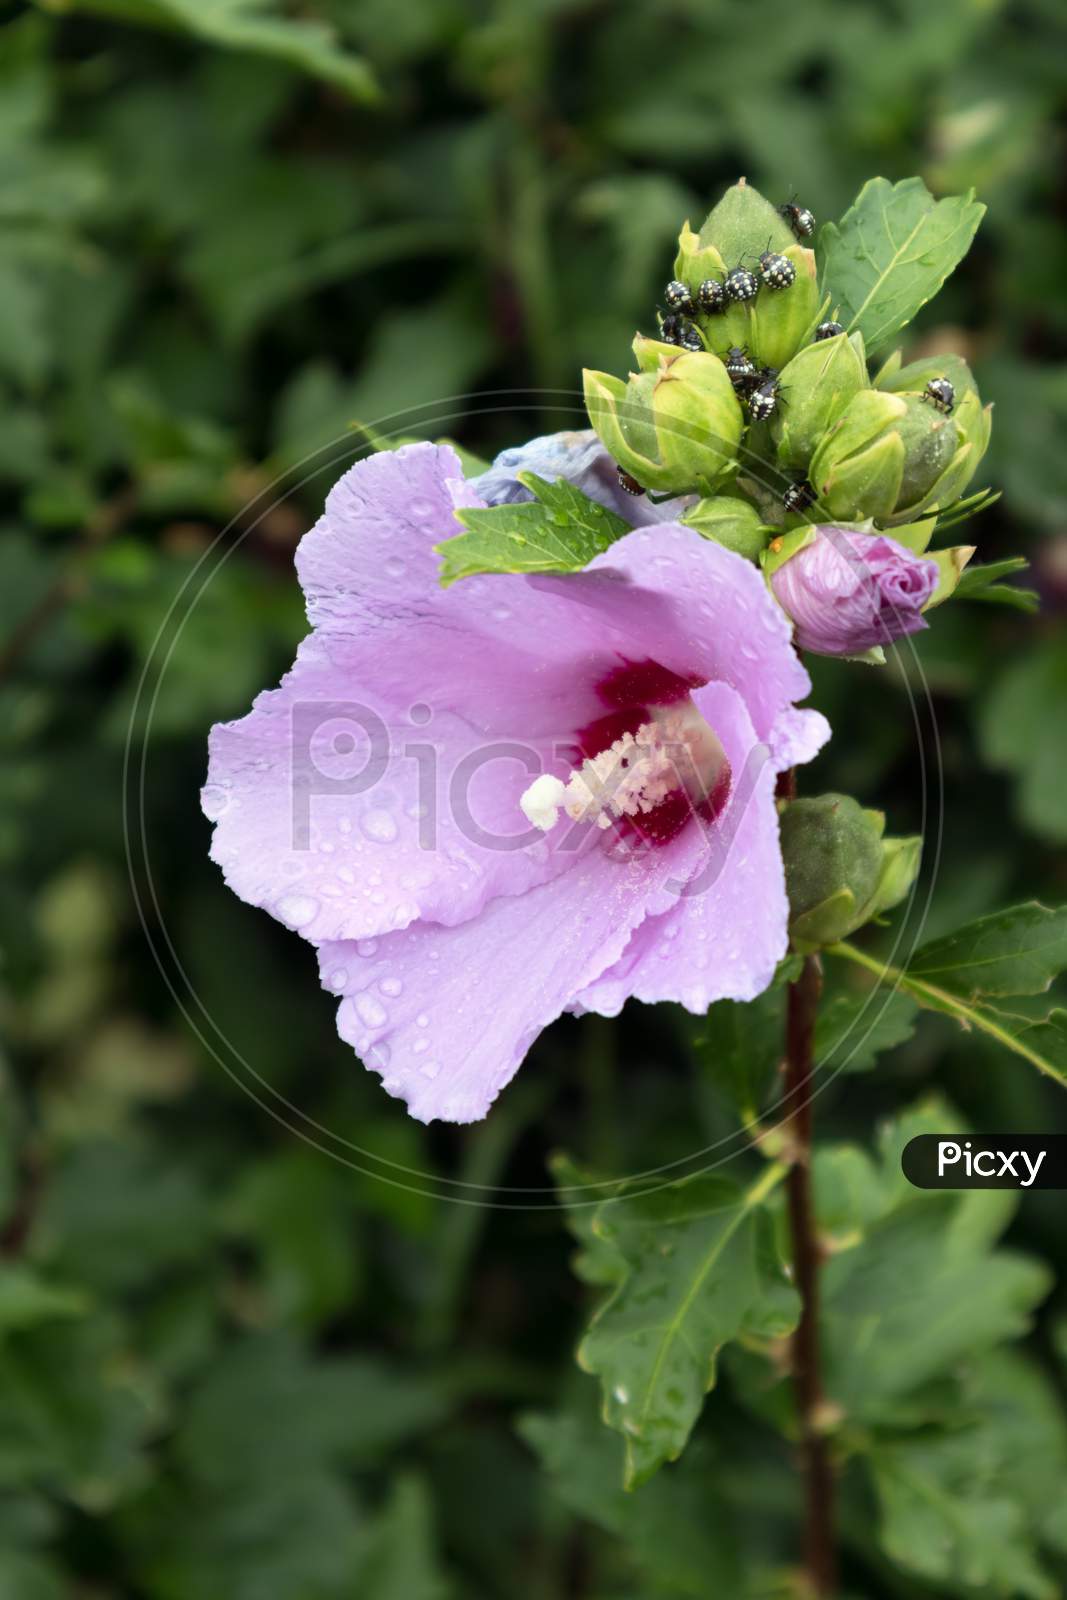 Hibiscus Shrub Growing And Flowering At Lake Iseo In Italy